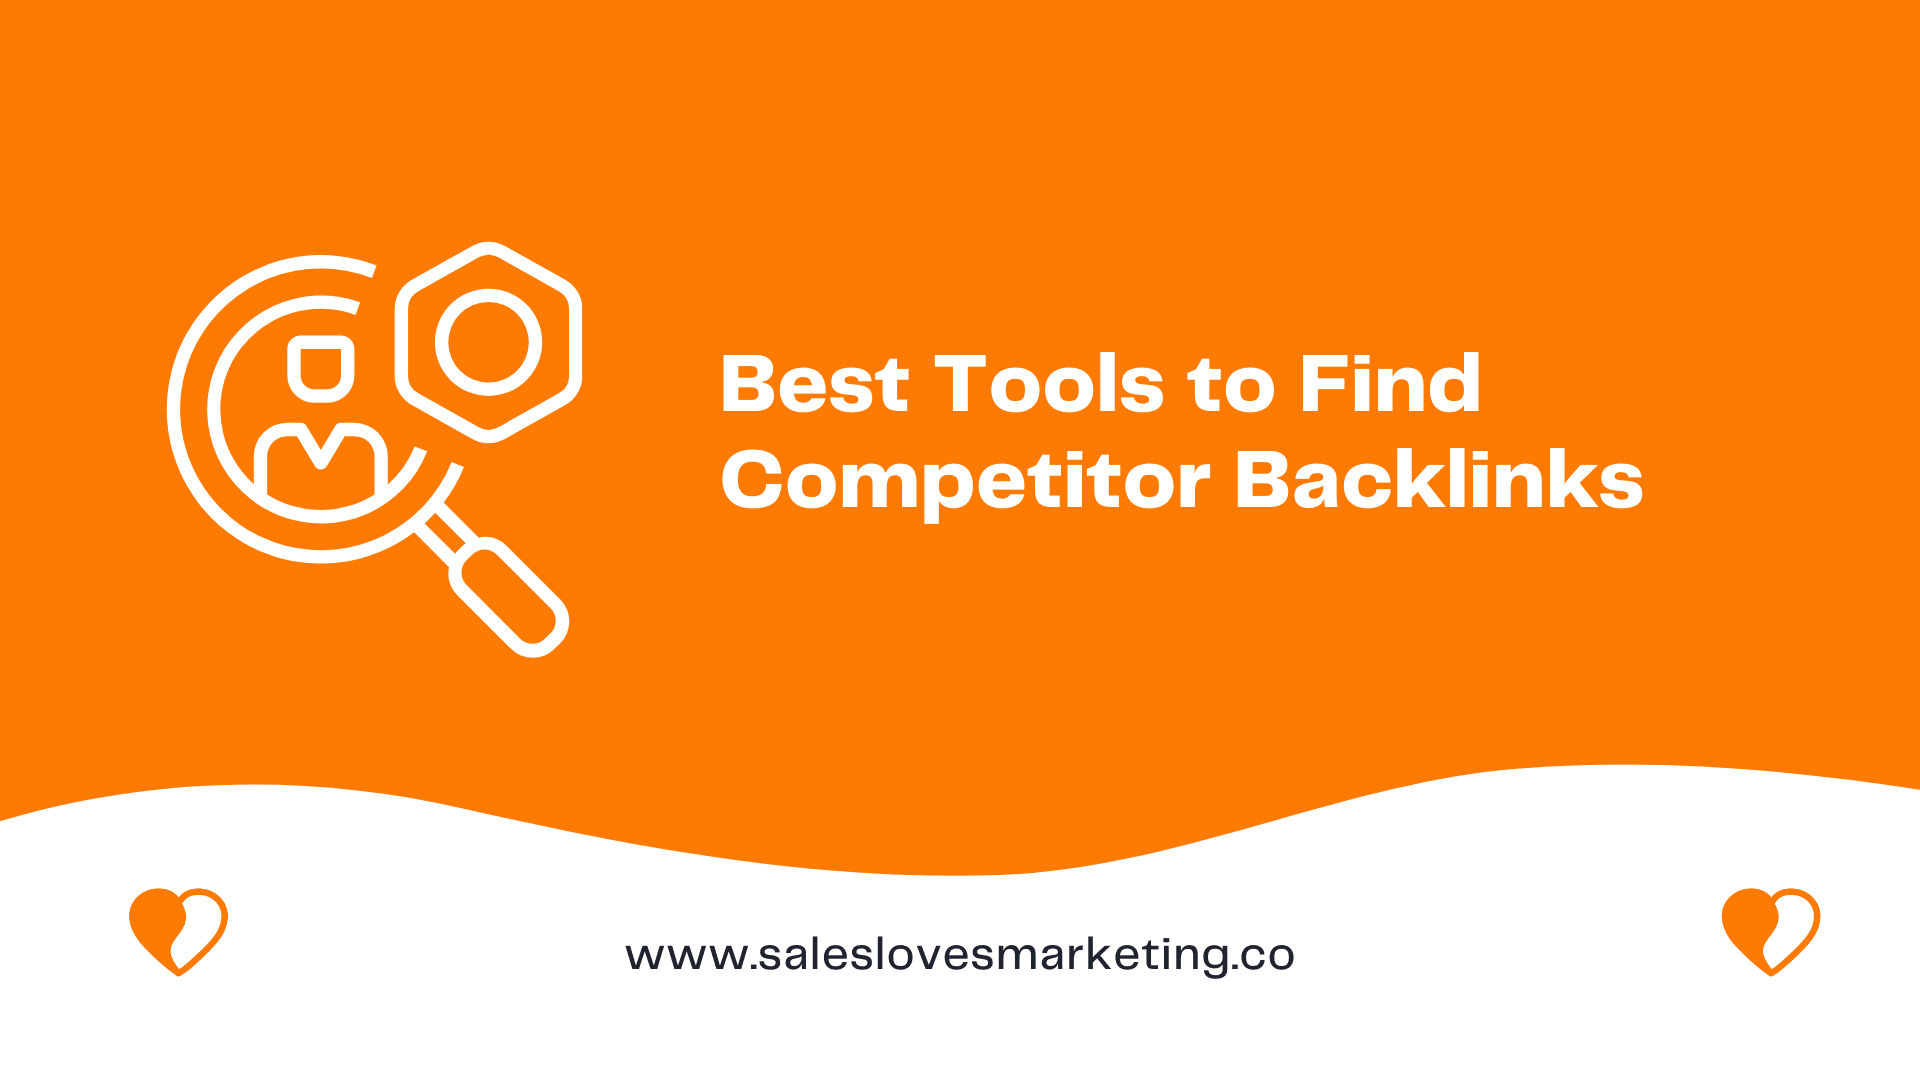 6 Best Tools to Find Competitor Backlinks